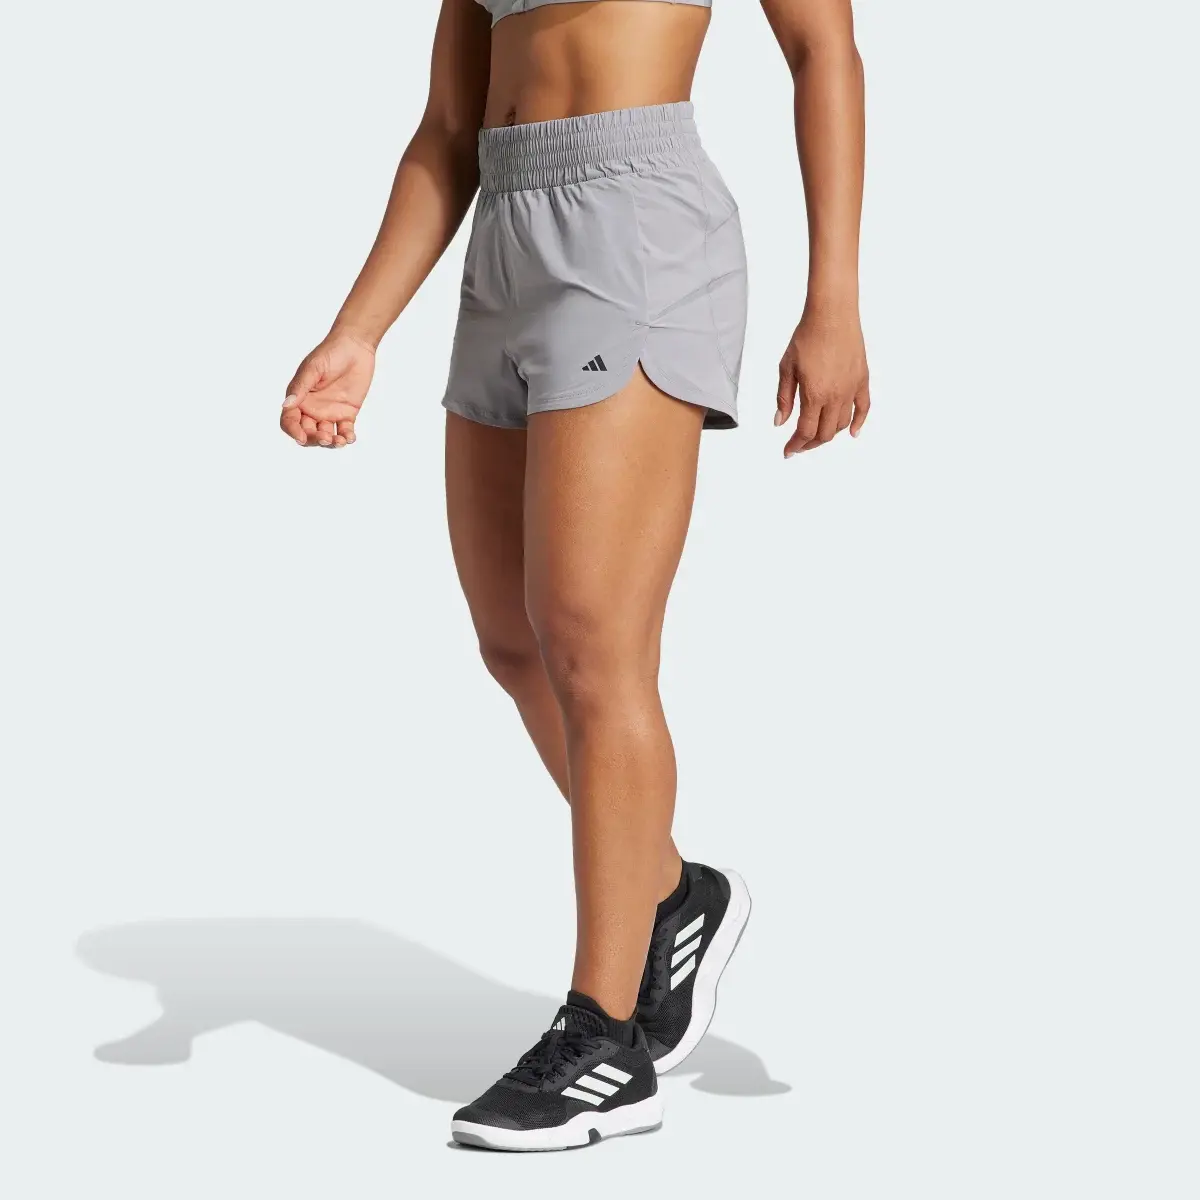 Adidas Pacer Stretch-Woven Zipper Pocket Lux Shorts. 1